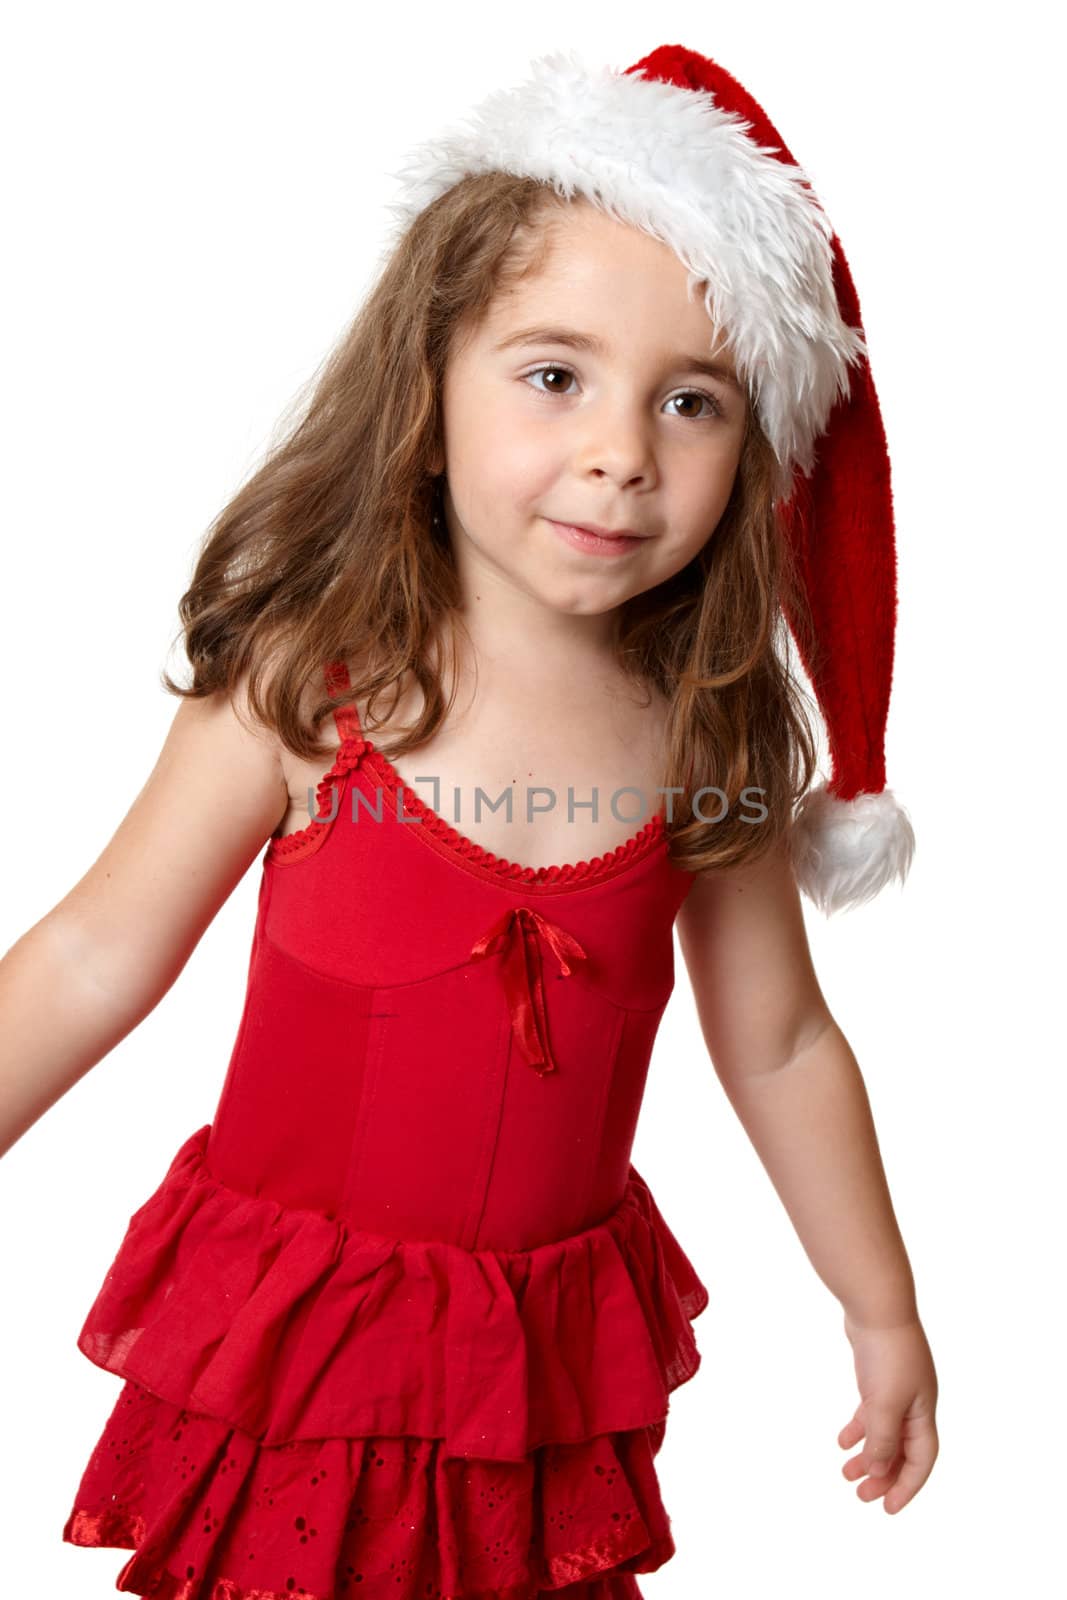 Prety girl wearing a red dress and red santa hat at Christmas